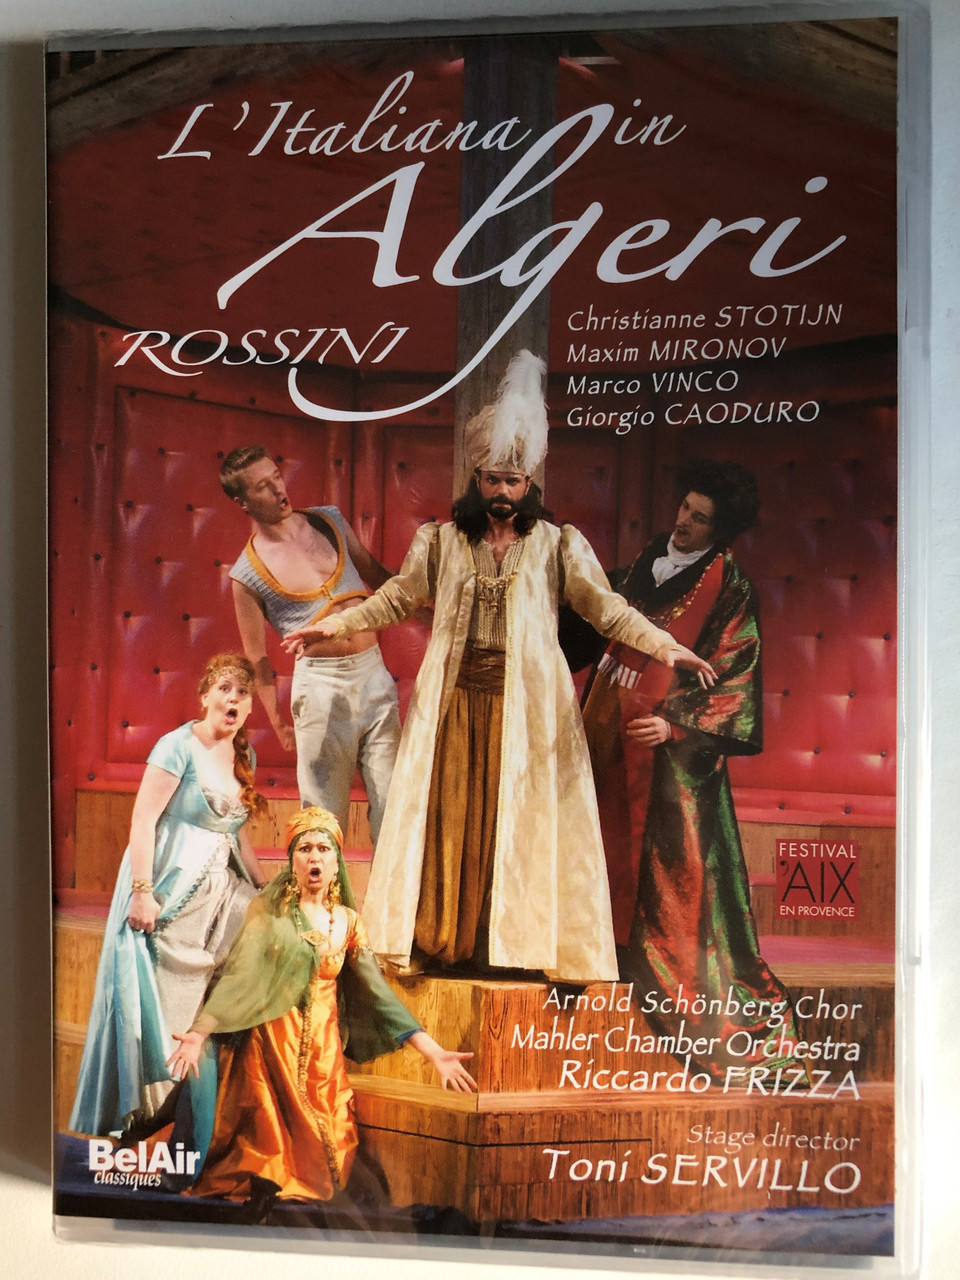 Rossini_LItaliana_in_Algeri_Playful_drama_in_two_acts_Libretto_Angelo_Rings_Festival_dAix-en-Provence_MAHLER_CHAMBER_ORCHESTRA_Con_ductor_Riccardo_FRIZZA_ARNOLD_SCHNBERG___70352.1691733115.1280.1280.JPG (960×1280)